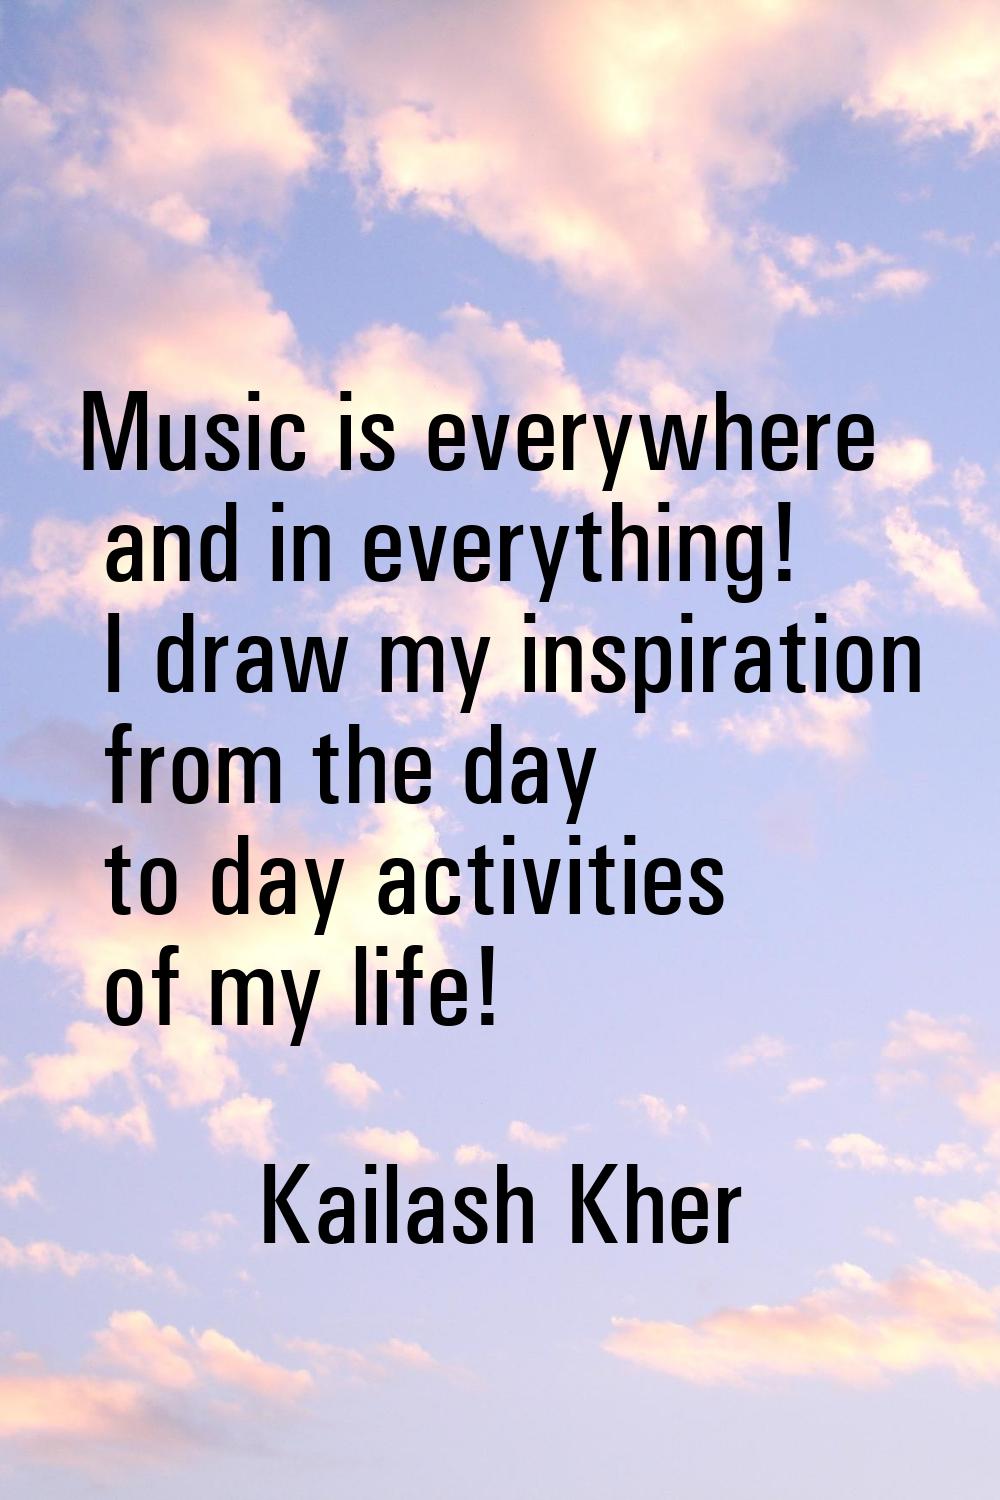 Music is everywhere and in everything! I draw my inspiration from the day to day activities of my l